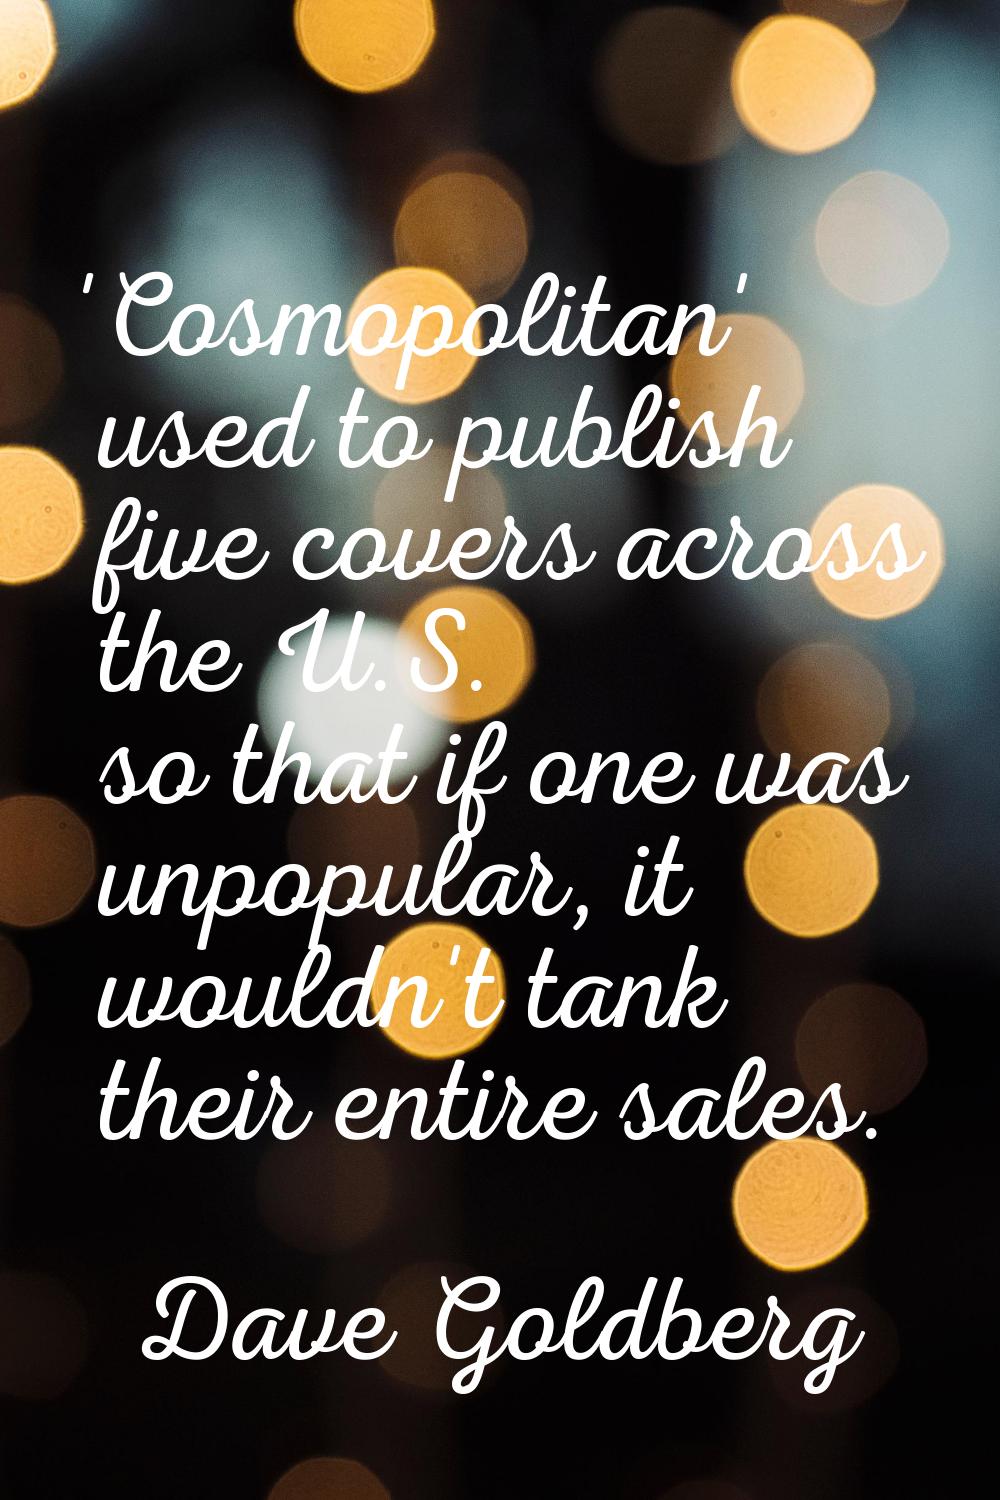 'Cosmopolitan' used to publish five covers across the U.S. so that if one was unpopular, it wouldn'